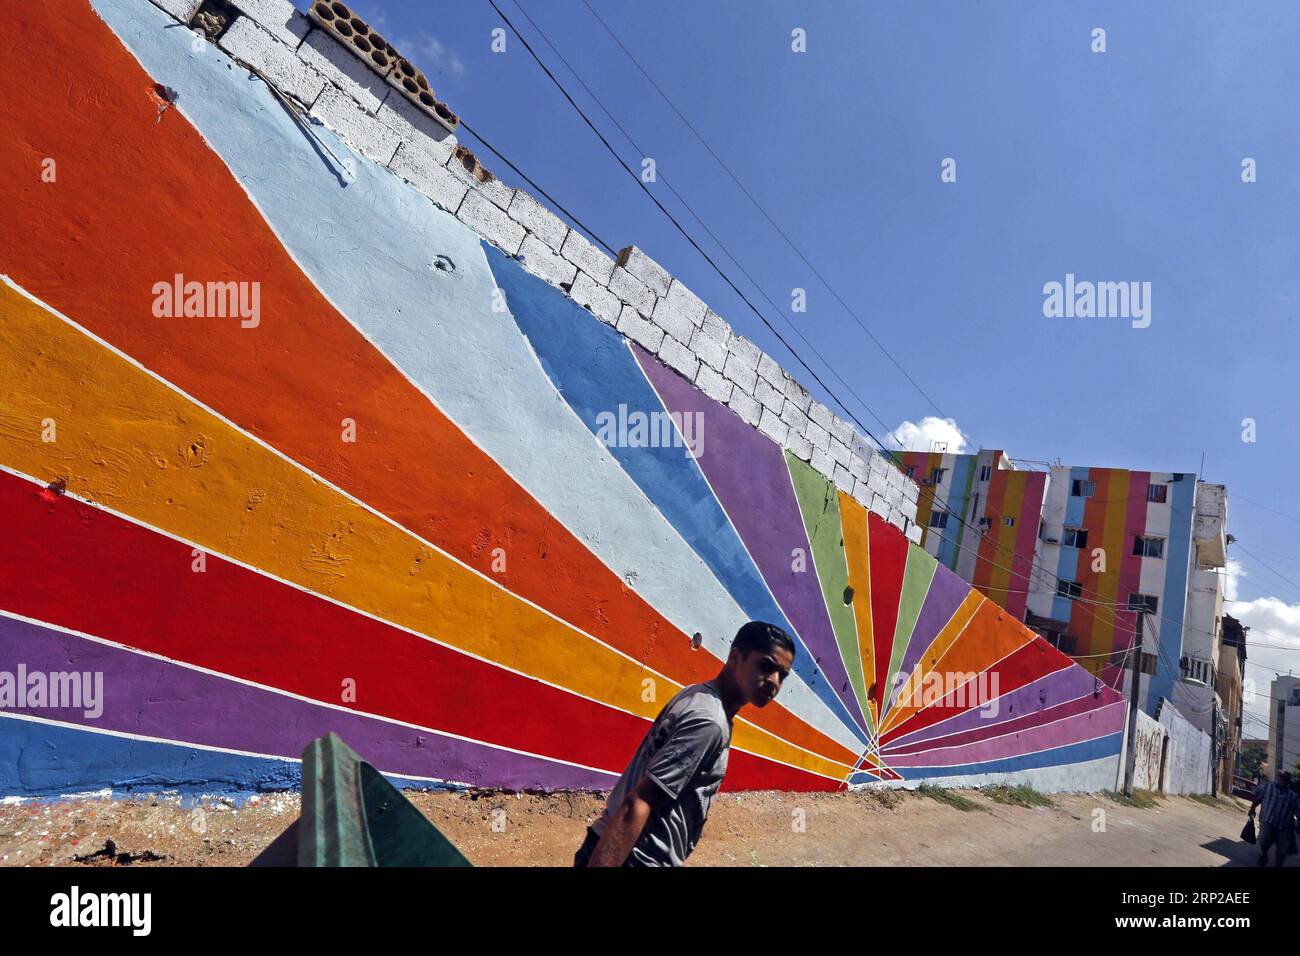 (180827) -- OUZAI, Aug. 27, 2018 -- A man walks past buildings with colorful paintings in Ouzai, south of Beirut, Lebanon, on Aug. 26, 2018. ) (jmmn) LEBANON-OUZAI-BUILDINGS BilalxJawich PUBLICATIONxNOTxINxCHN Stock Photo